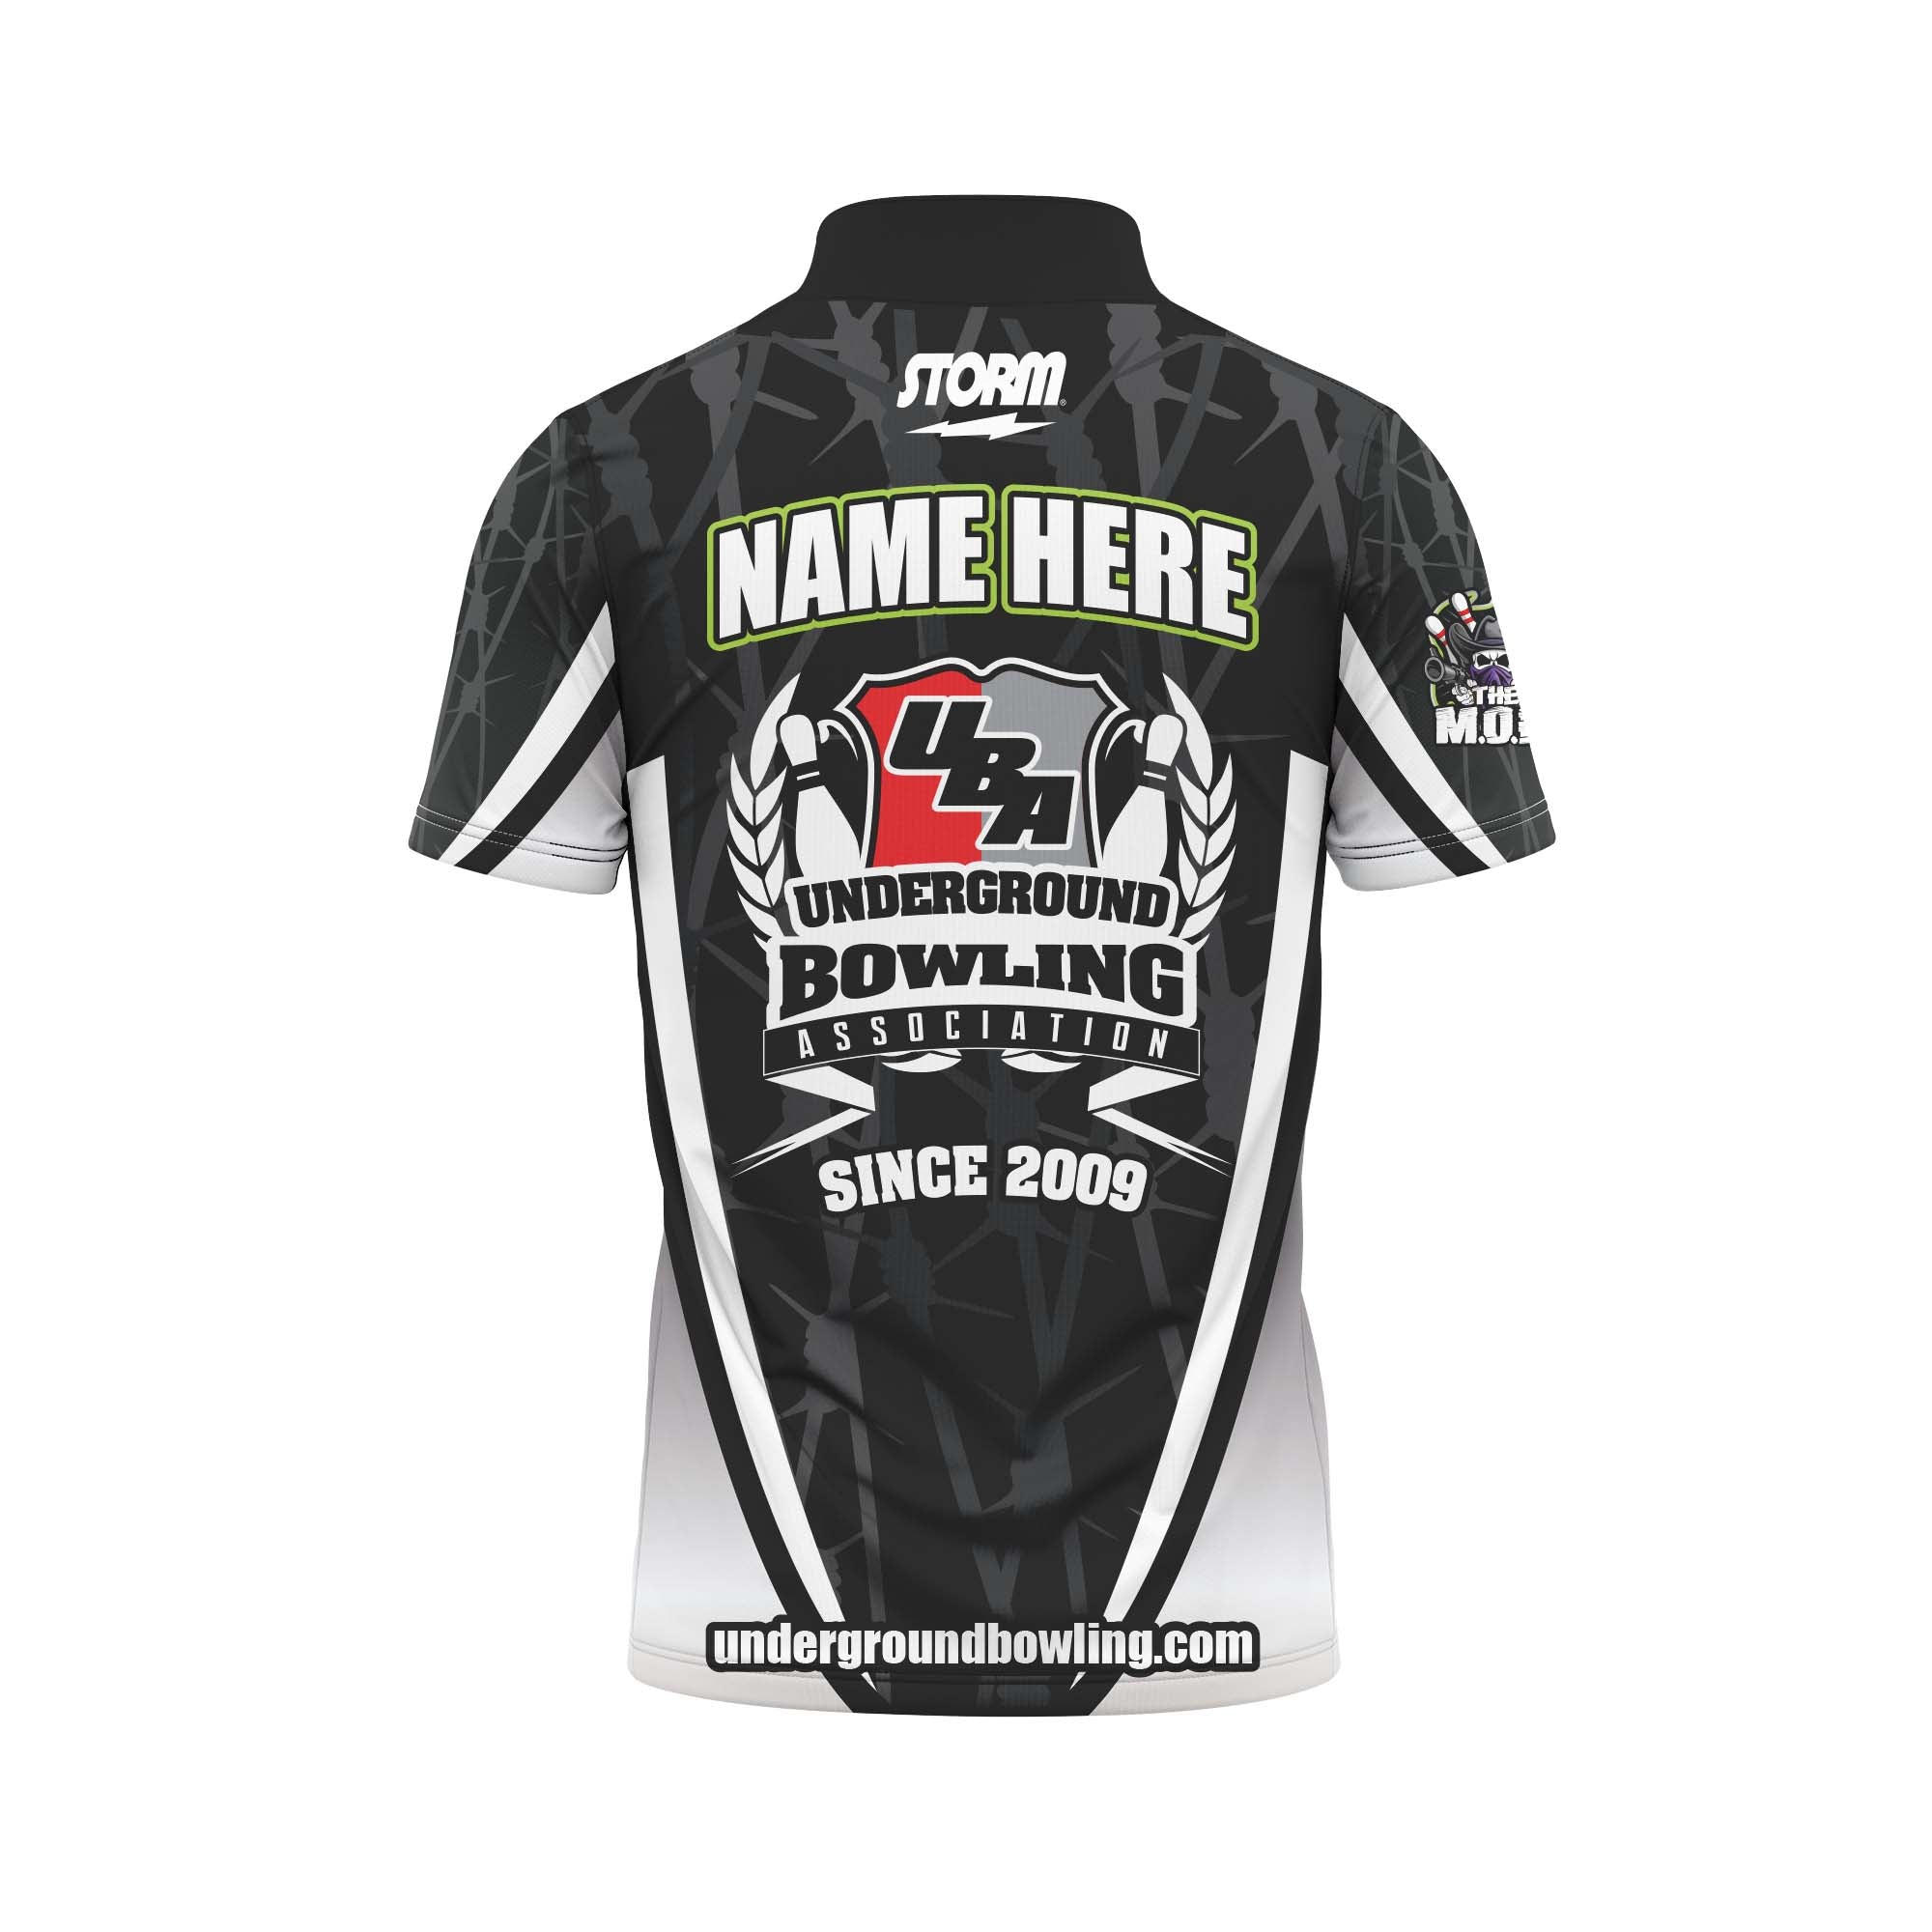 The MOB Black Jersey